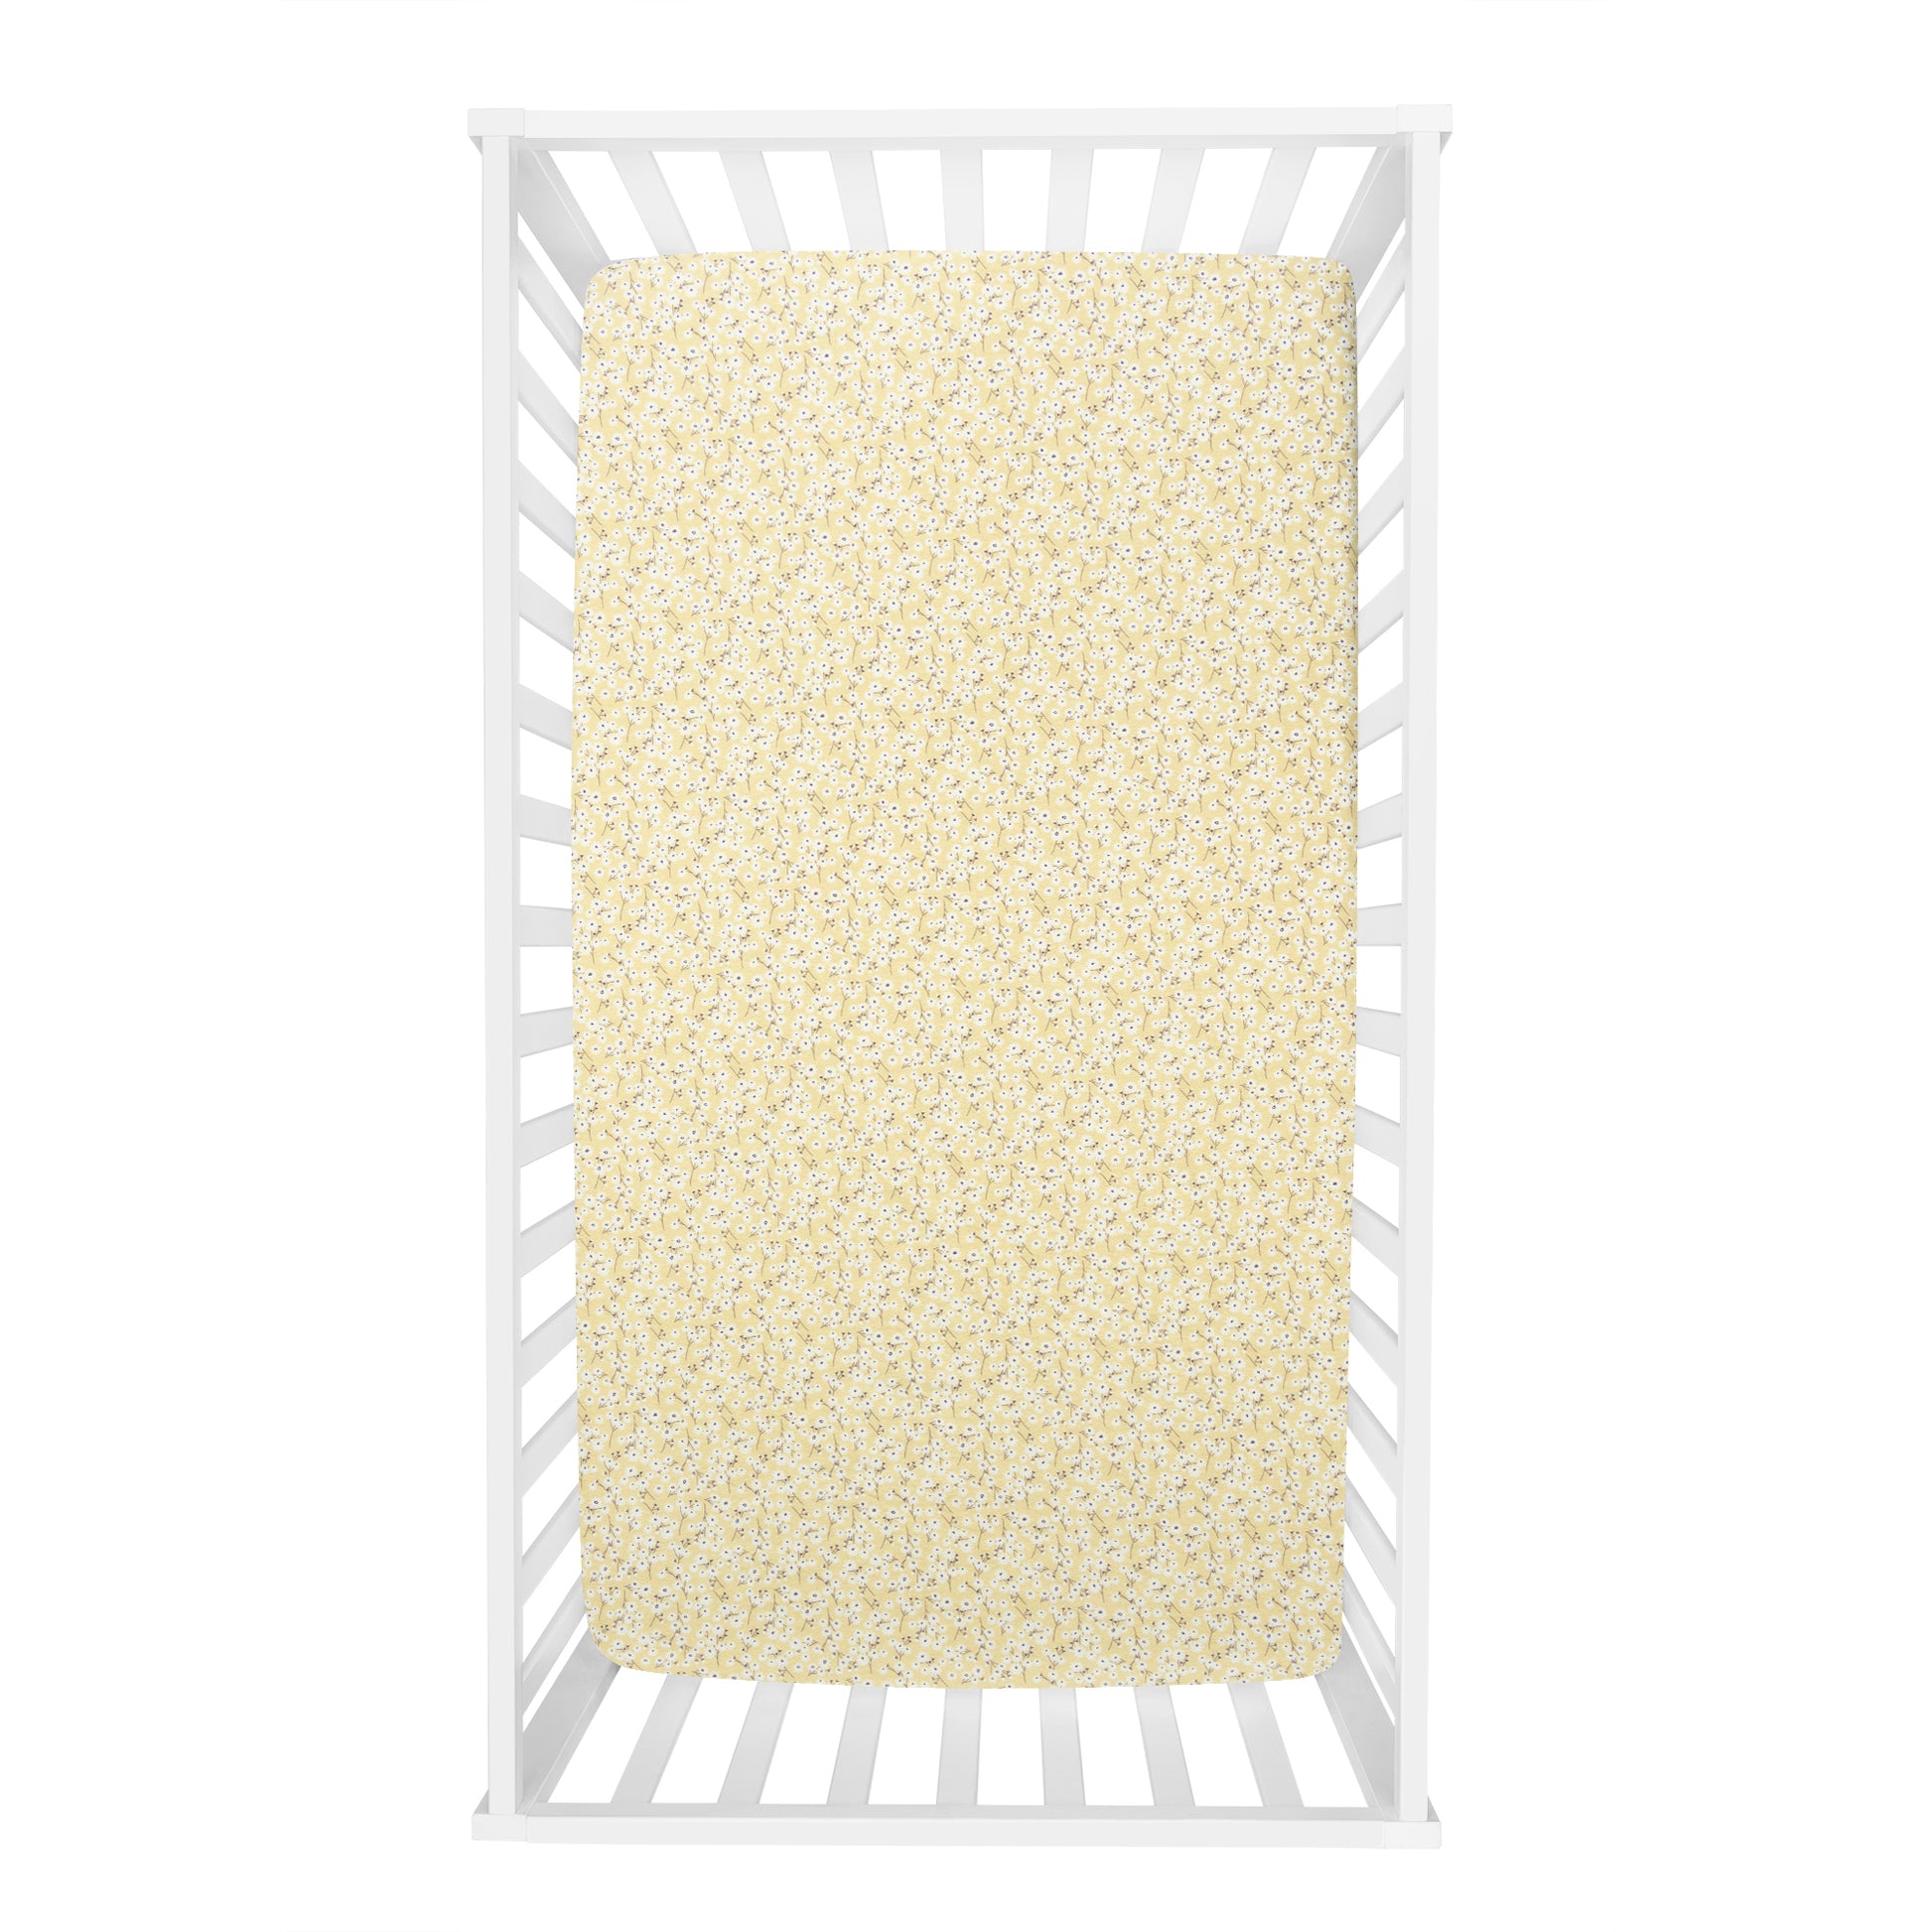  Golden Daisies Deluxe Flannel Fitted Crib Sheet - overhead view